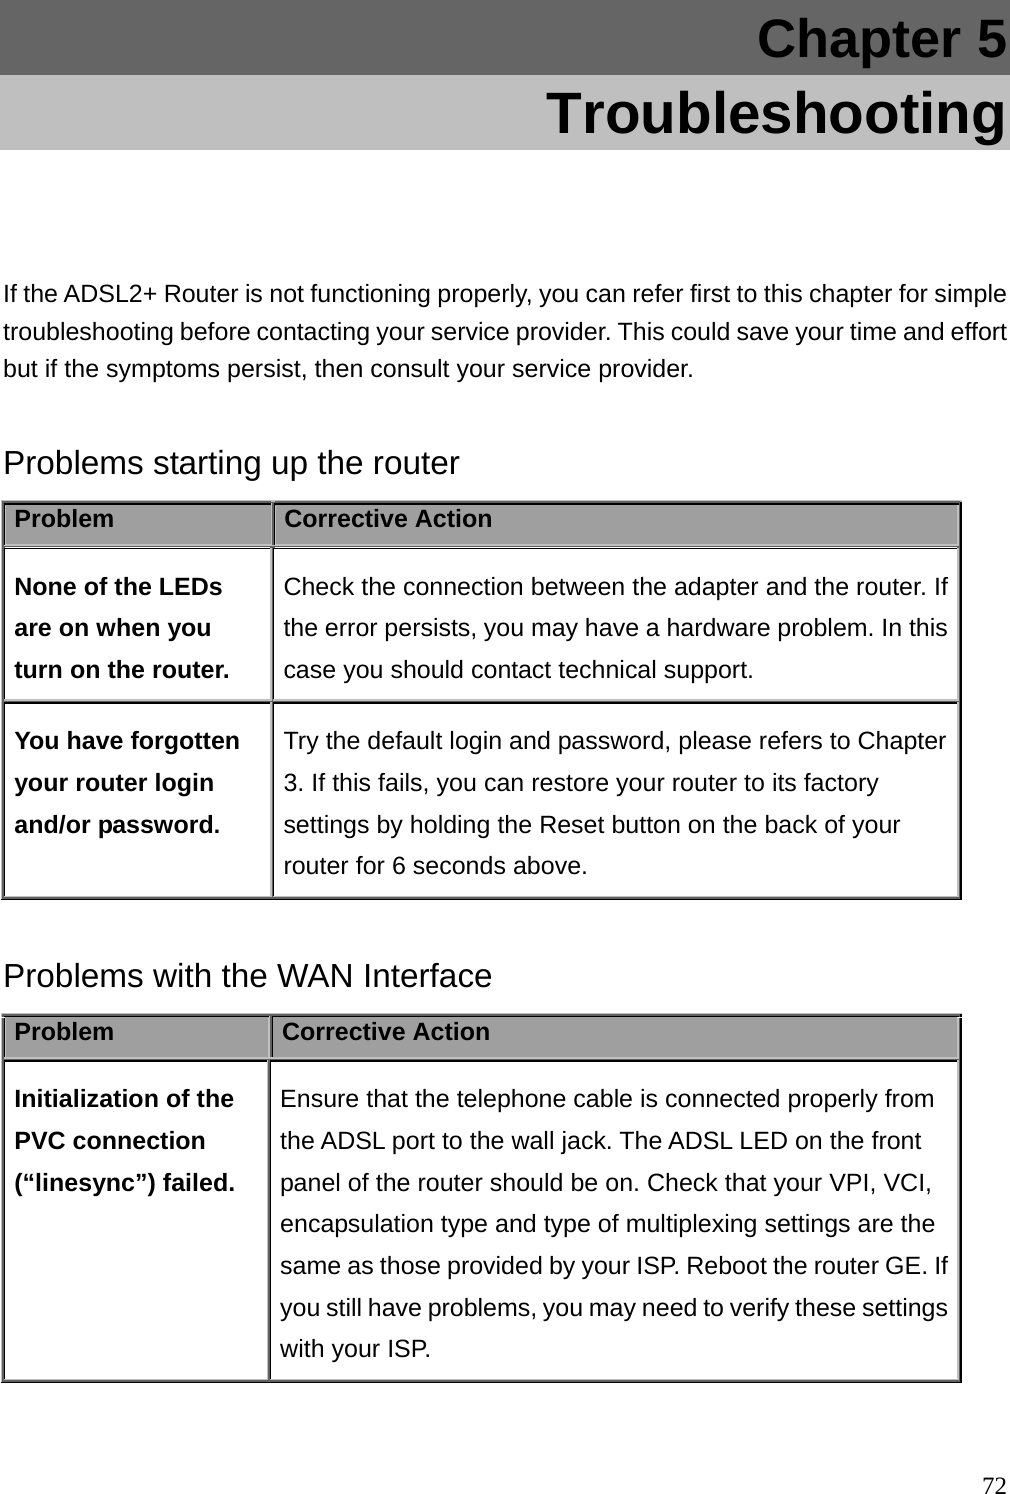 Chapter 5    Troubleshooting  If the ADSL2+ Router is not functioning properly, you can refer first to this chapter for simple troubleshooting before contacting your service provider. This could save your time and effort but if the symptoms persist, then consult your service provider.  Problems starting up the router Problem  Corrective Action None of the LEDs are on when you turn on the router. Check the connection between the adapter and the router. If the error persists, you may have a hardware problem. In this case you should contact technical support. You have forgotten your router login and/or password. Try the default login and password, please refers to Chapter 3. If this fails, you can restore your router to its factory settings by holding the Reset button on the back of your router for 6 seconds above.  Problems with the WAN Interface Problem  Corrective Action Initialization of the PVC connection (“linesync”) failed. Ensure that the telephone cable is connected properly from the ADSL port to the wall jack. The ADSL LED on the front panel of the router should be on. Check that your VPI, VCI, encapsulation type and type of multiplexing settings are the same as those provided by your ISP. Reboot the router GE. If you still have problems, you may need to verify these settings with your ISP.  72